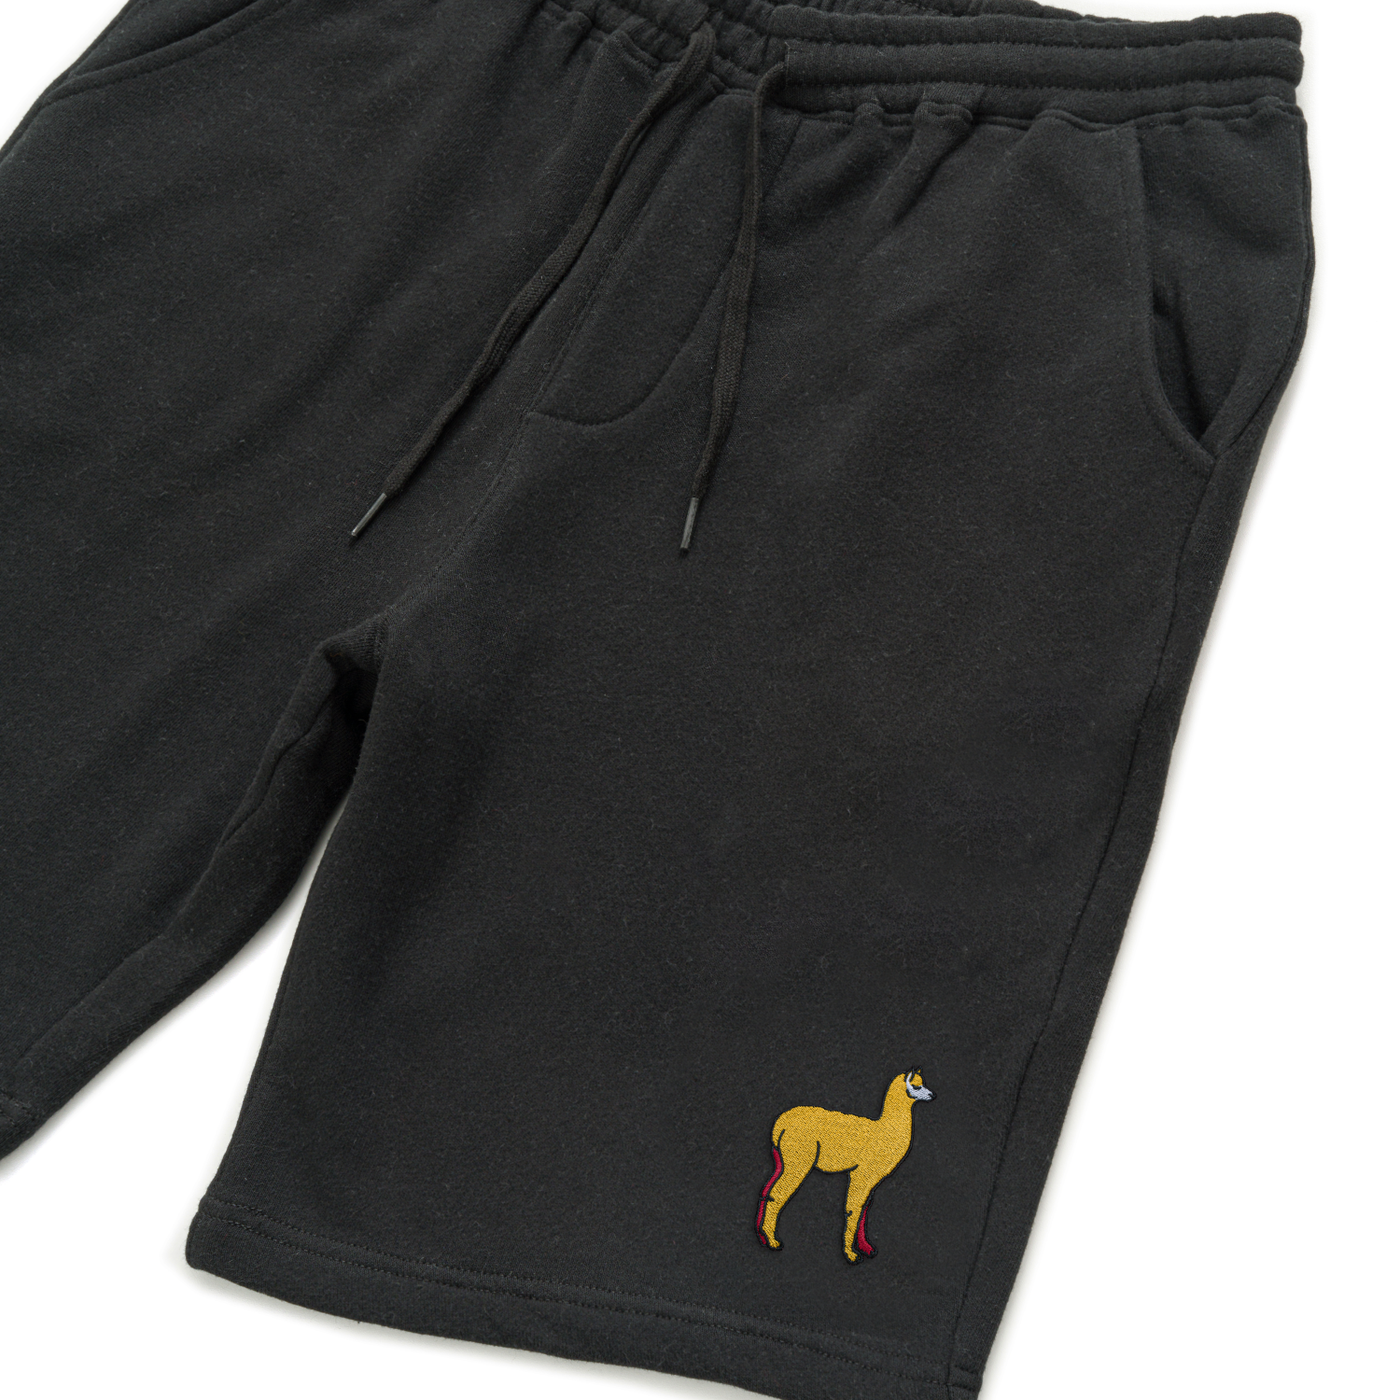 Bobby's Planet Men's Embroidered Alpaca Shorts from South American Amazon Animals Collection in Black Color#color_black